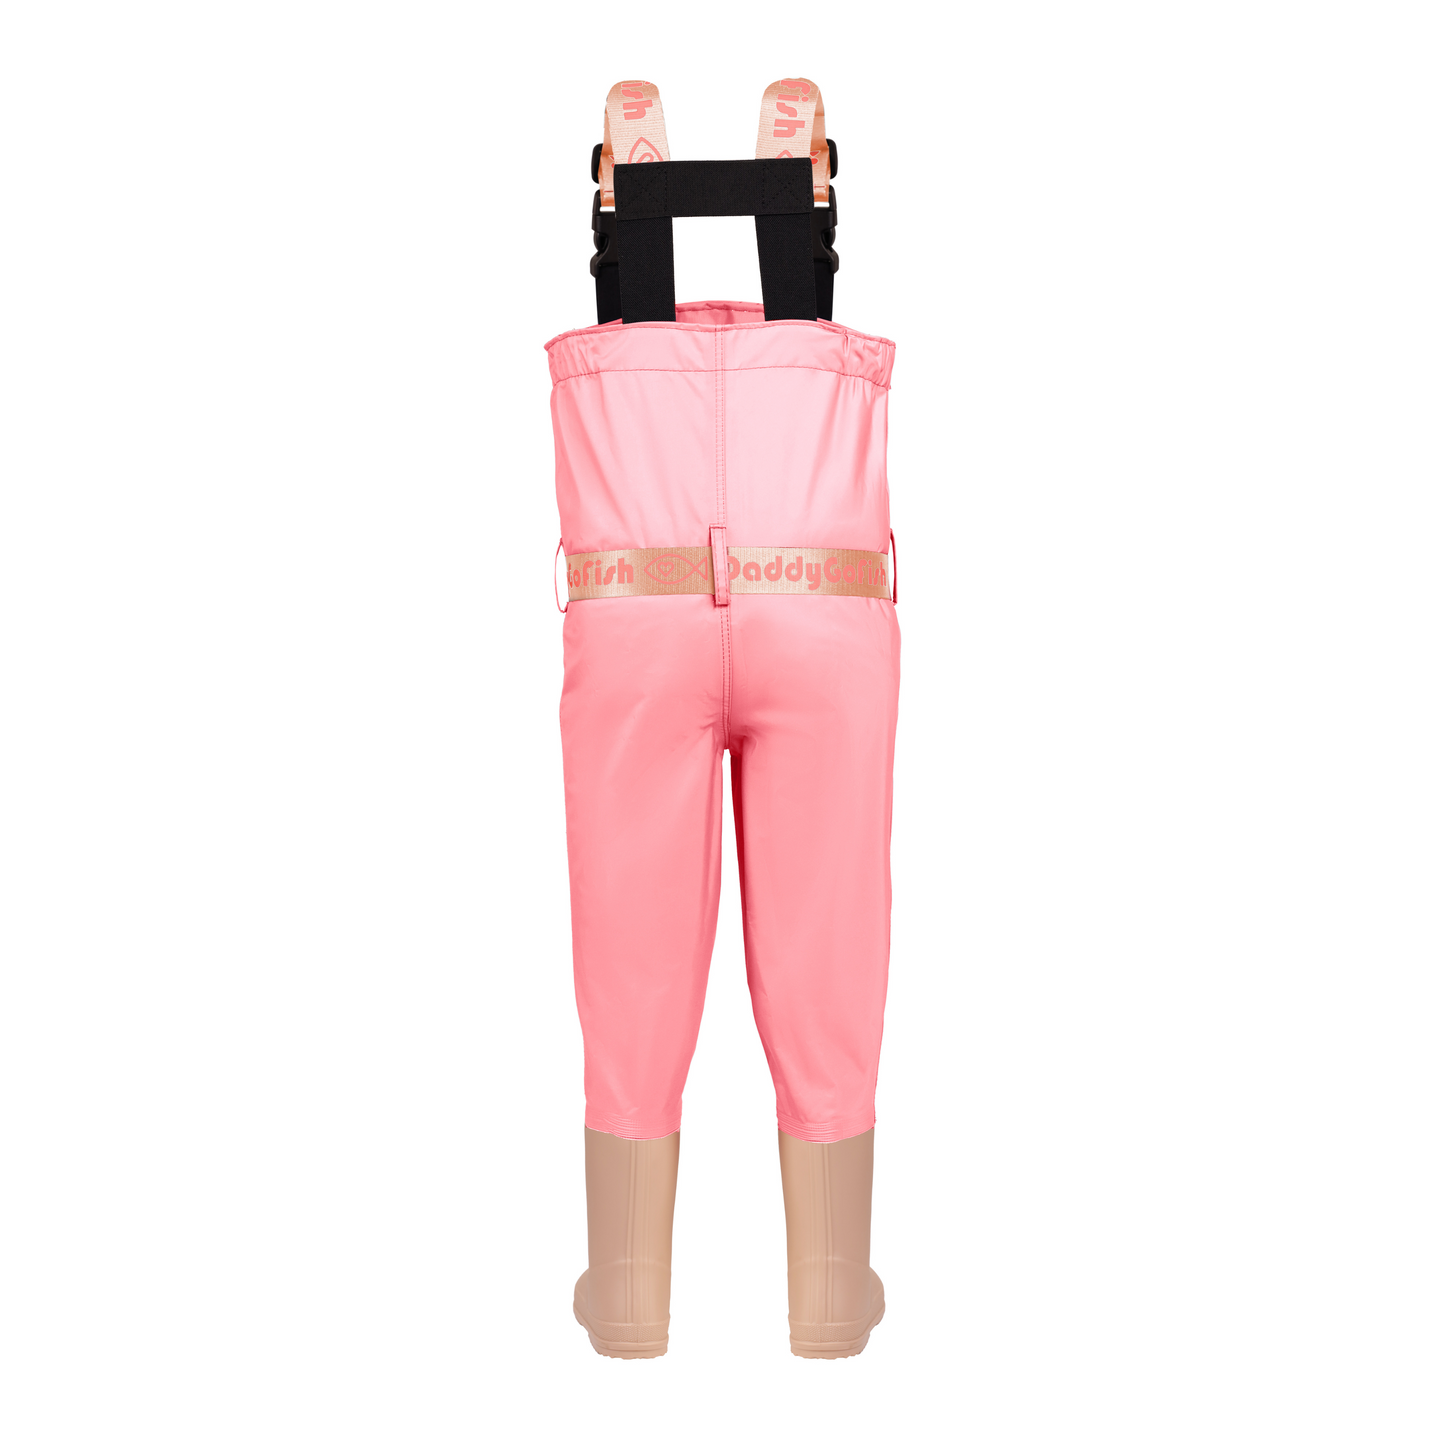 PVC Chest Waders for Kids, Pink Fishing and Hunting Waders, Waterproof, Easy To Clean